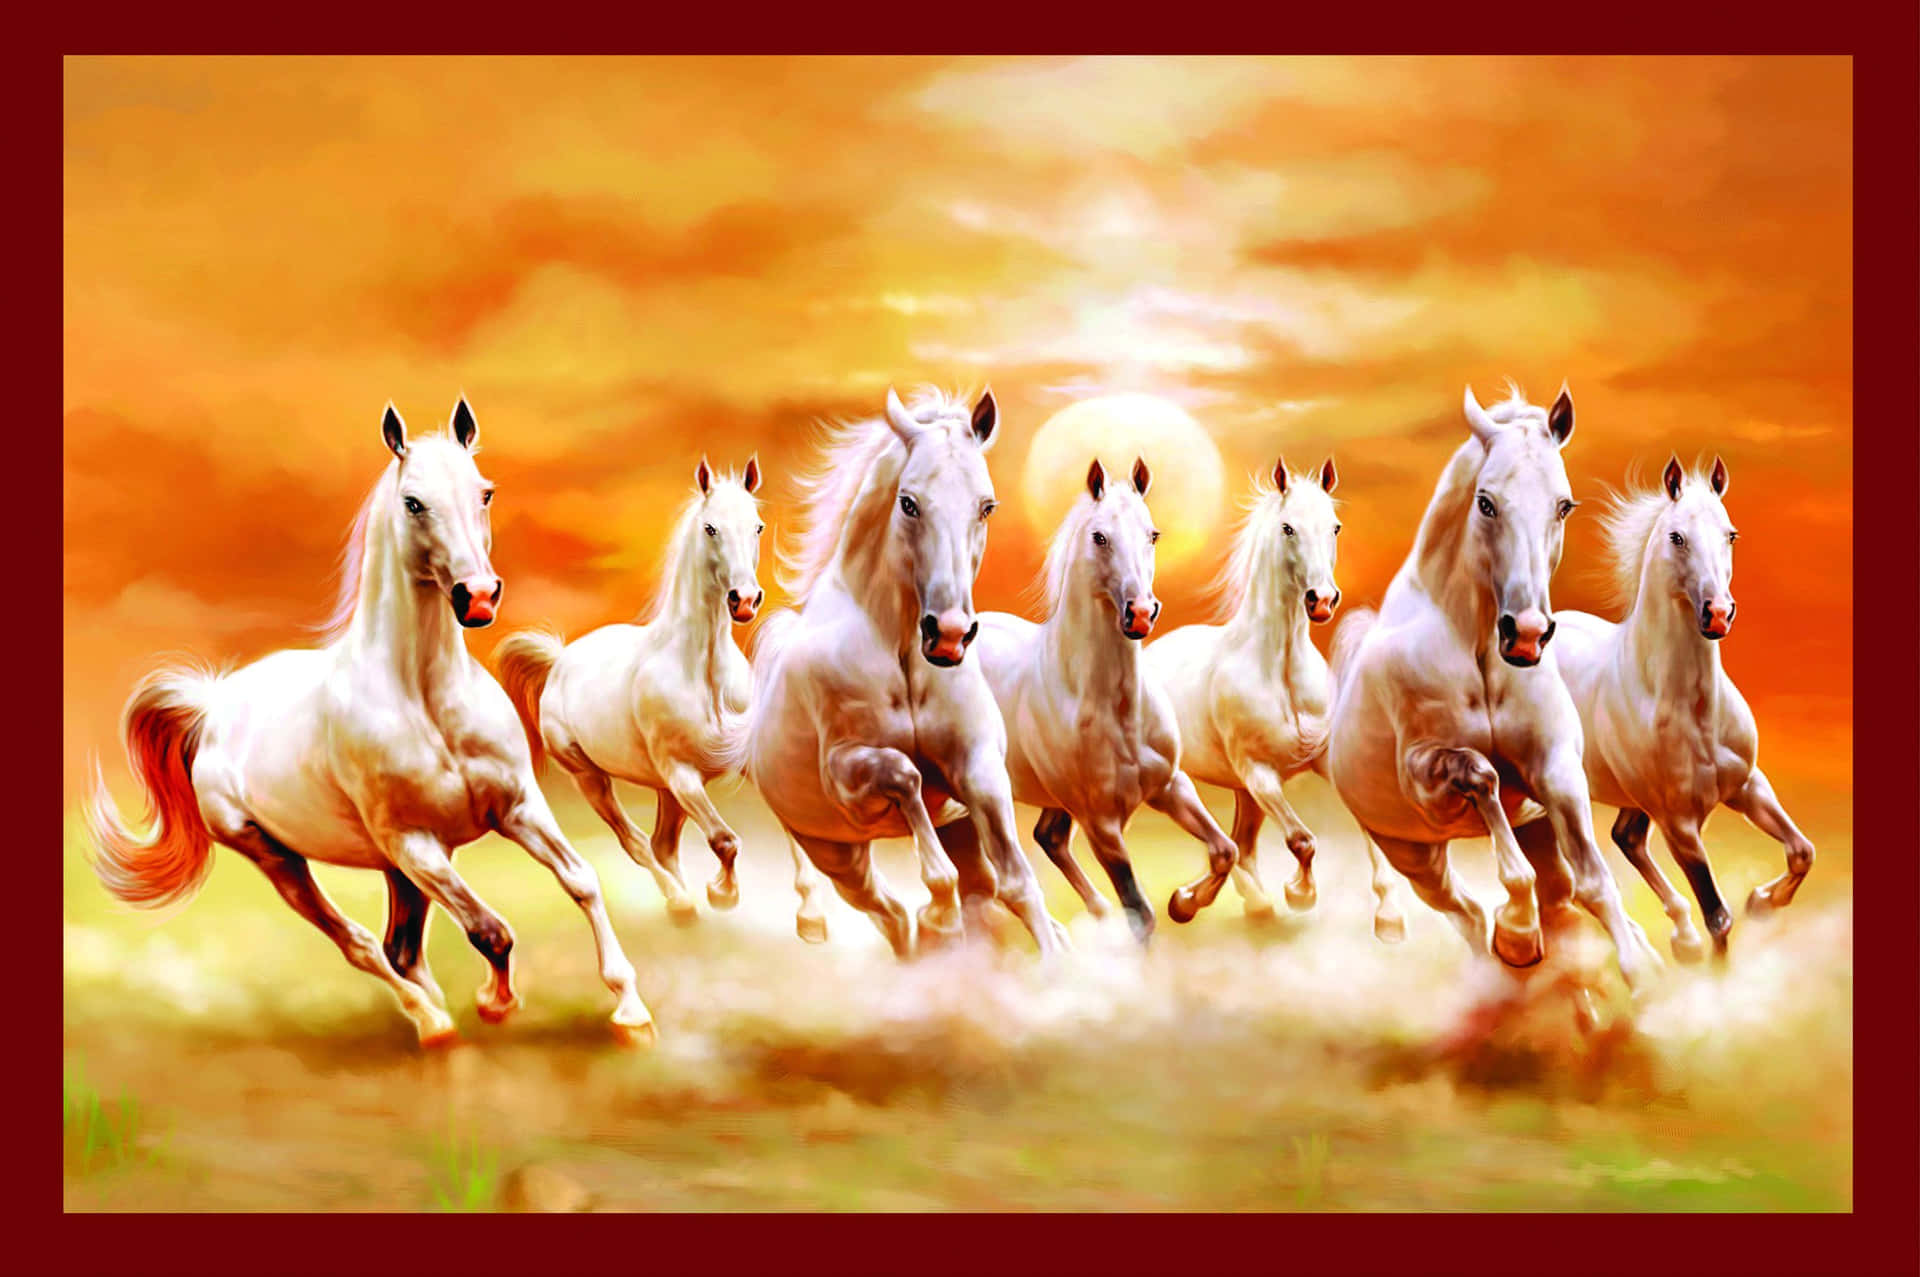 7 White Horses With Red Border Wallpaper